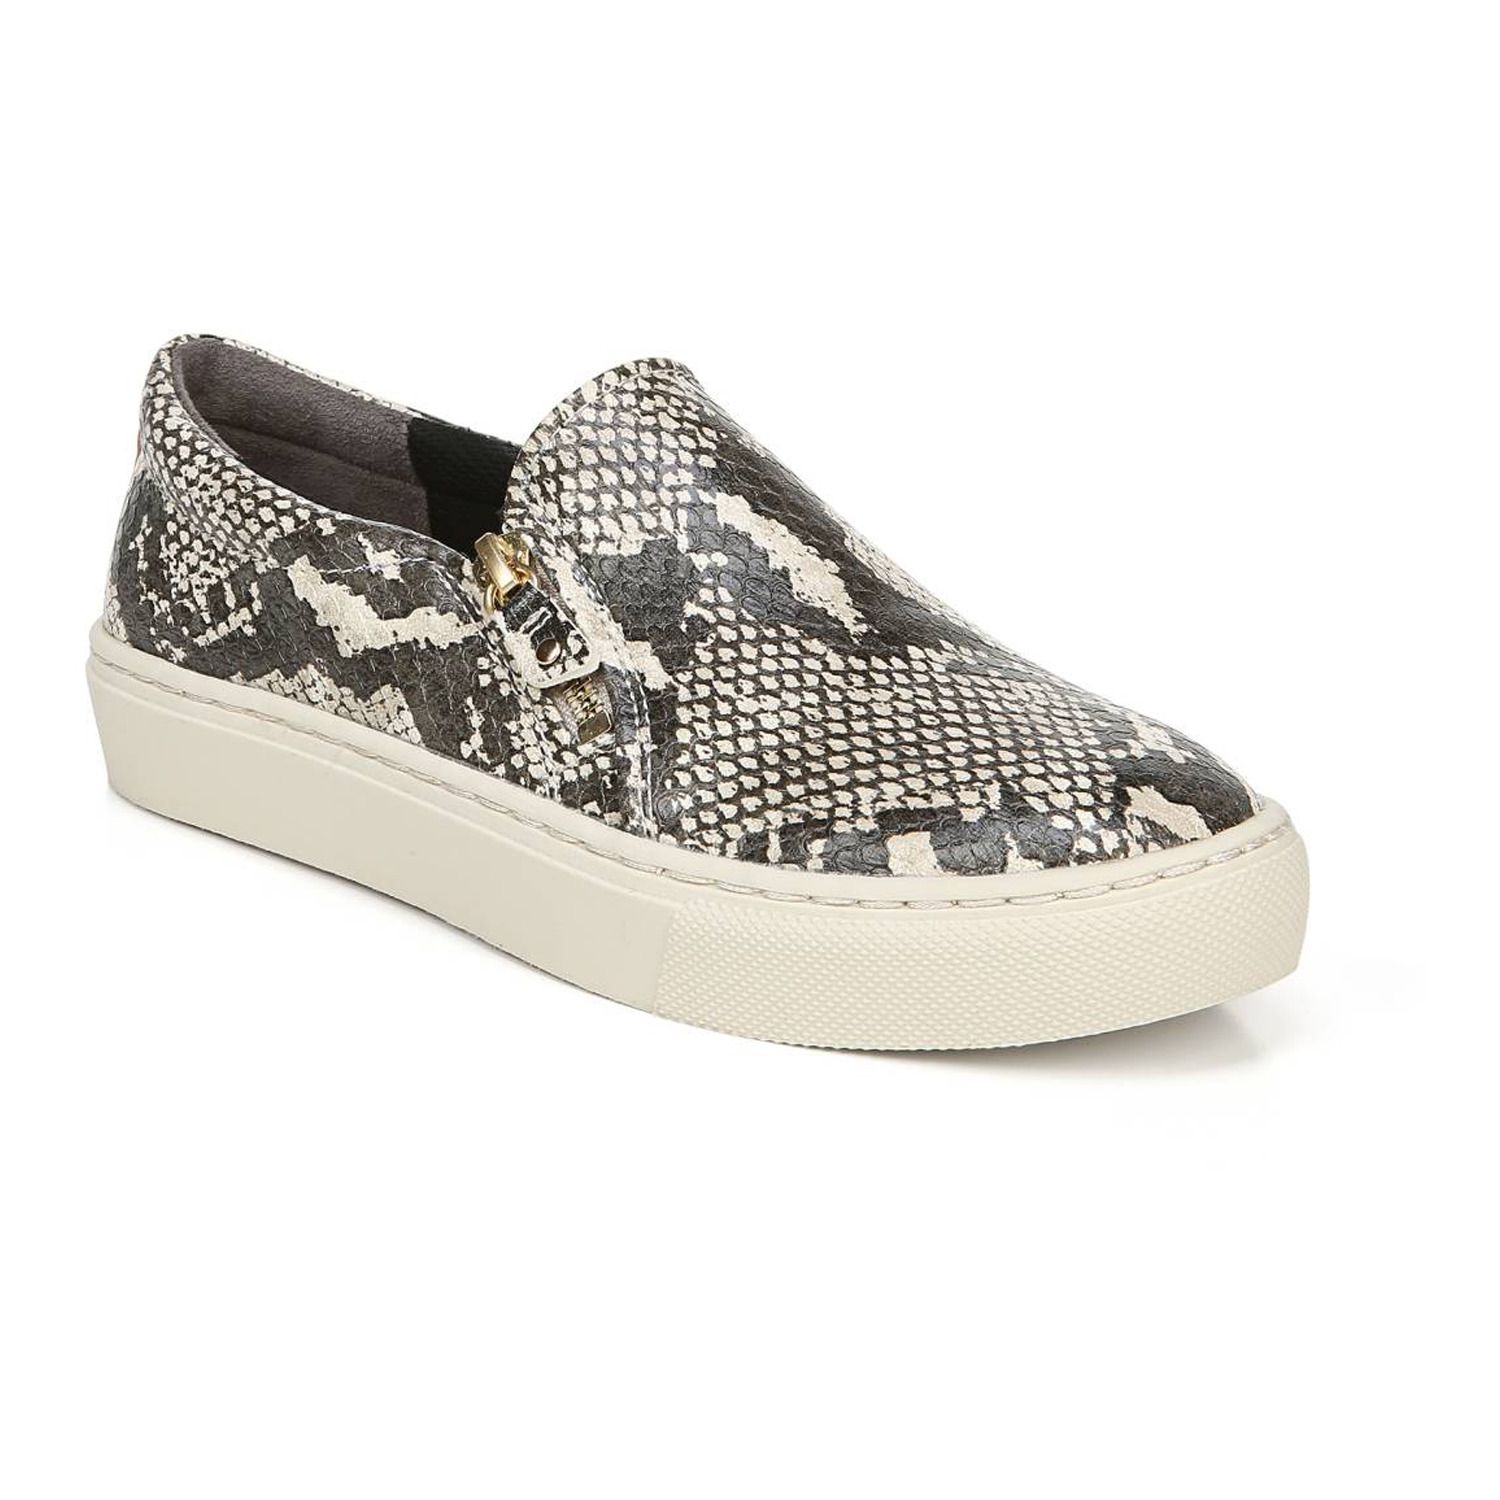 No Chill Women's Slip-on Sneakers